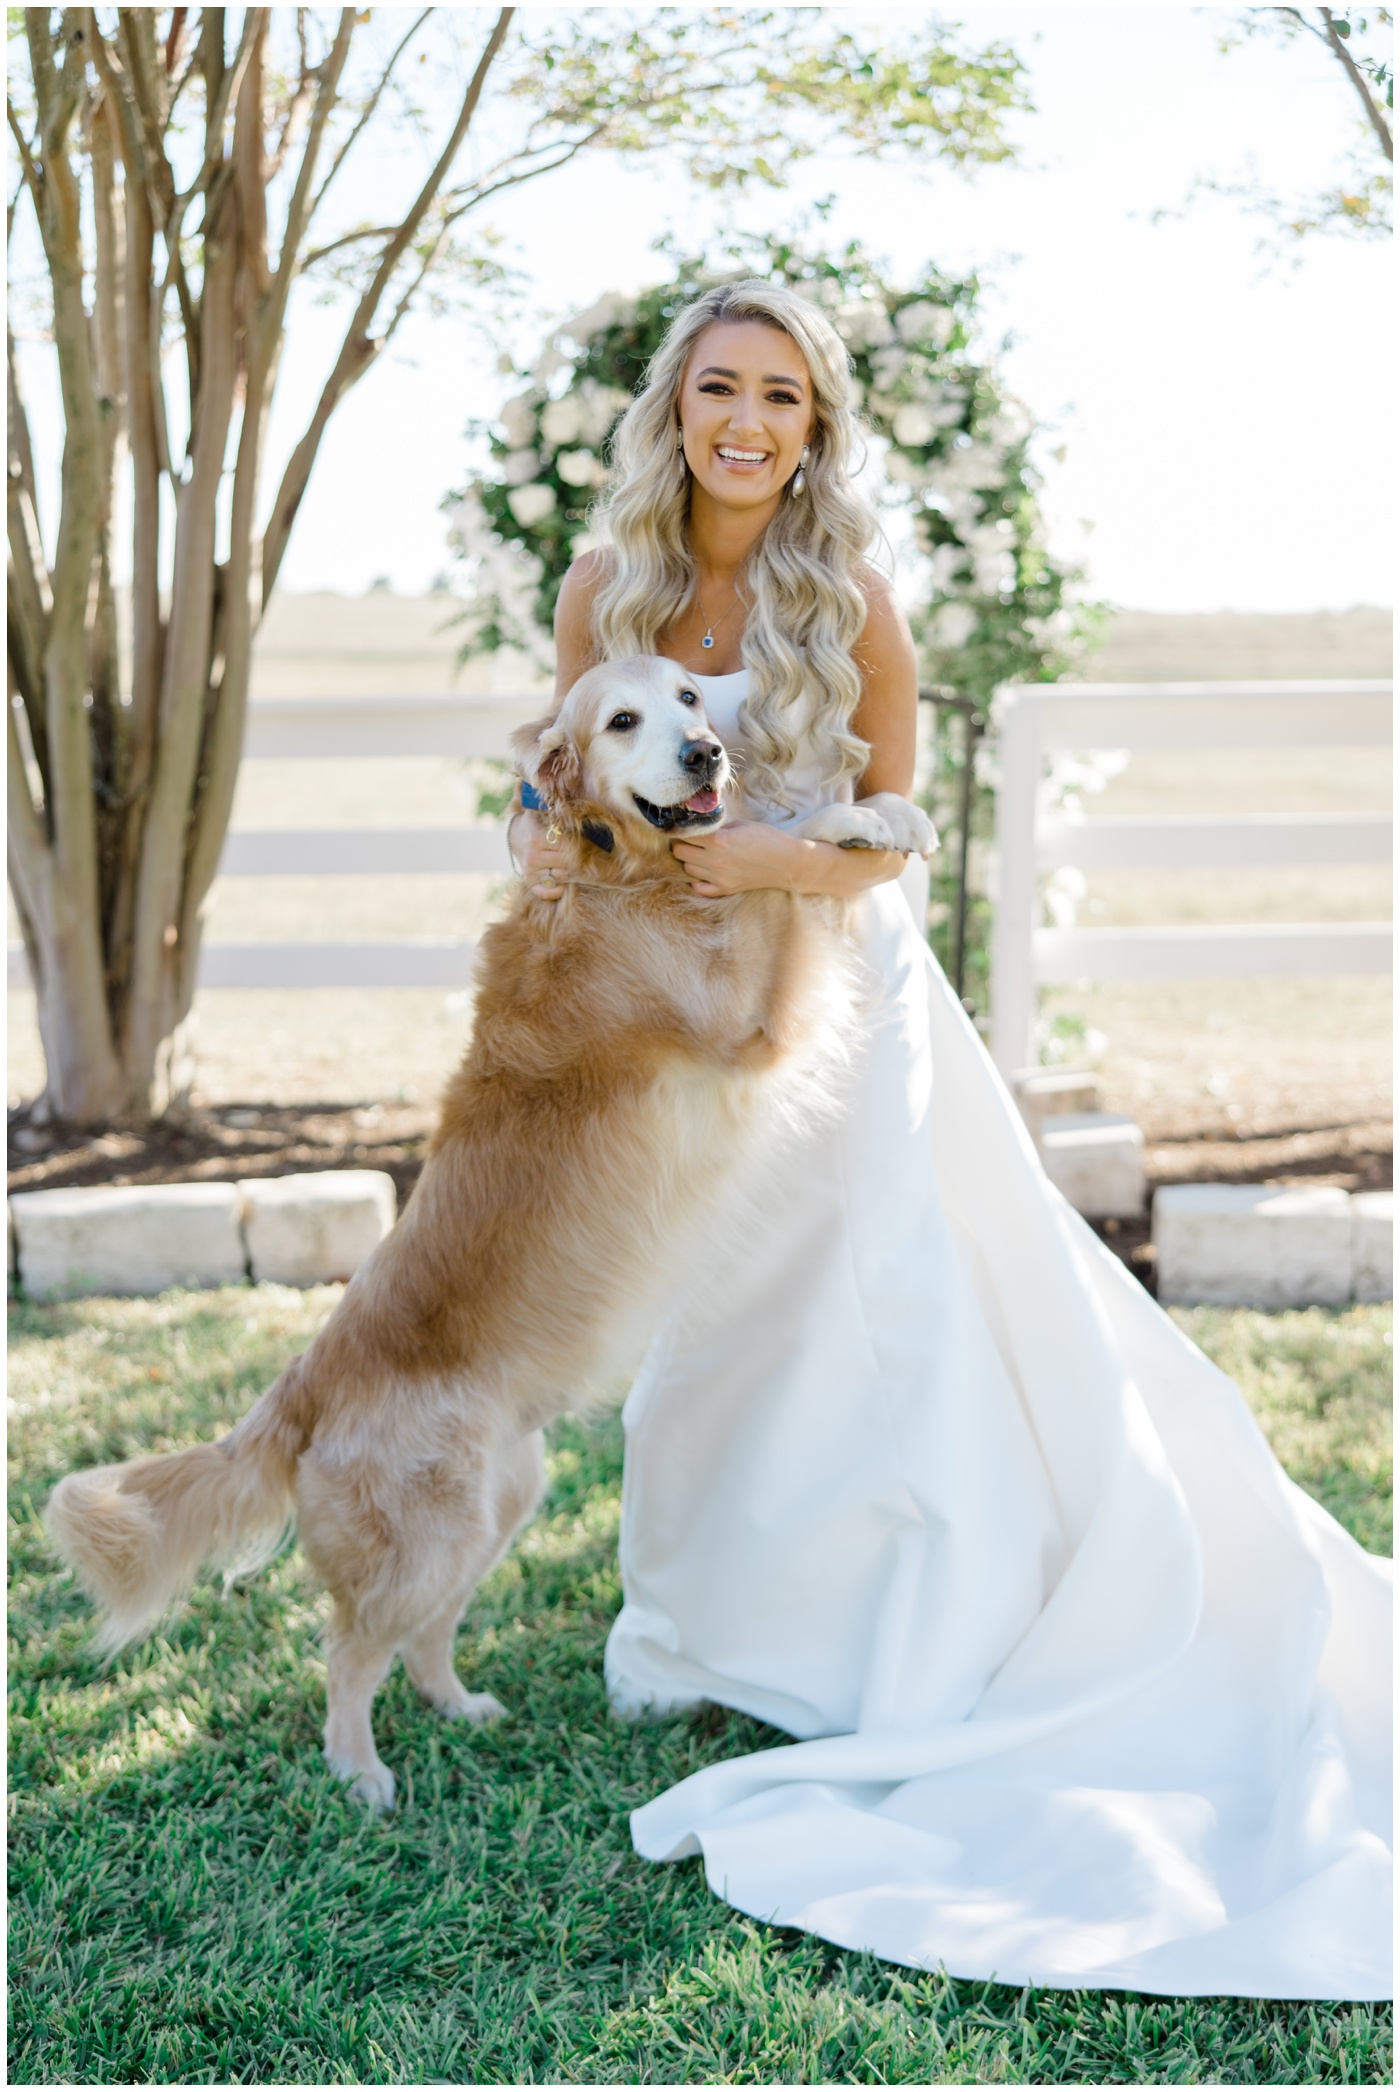 Texas Wedding Photographer | A bride smiles with her dog on her wedding day